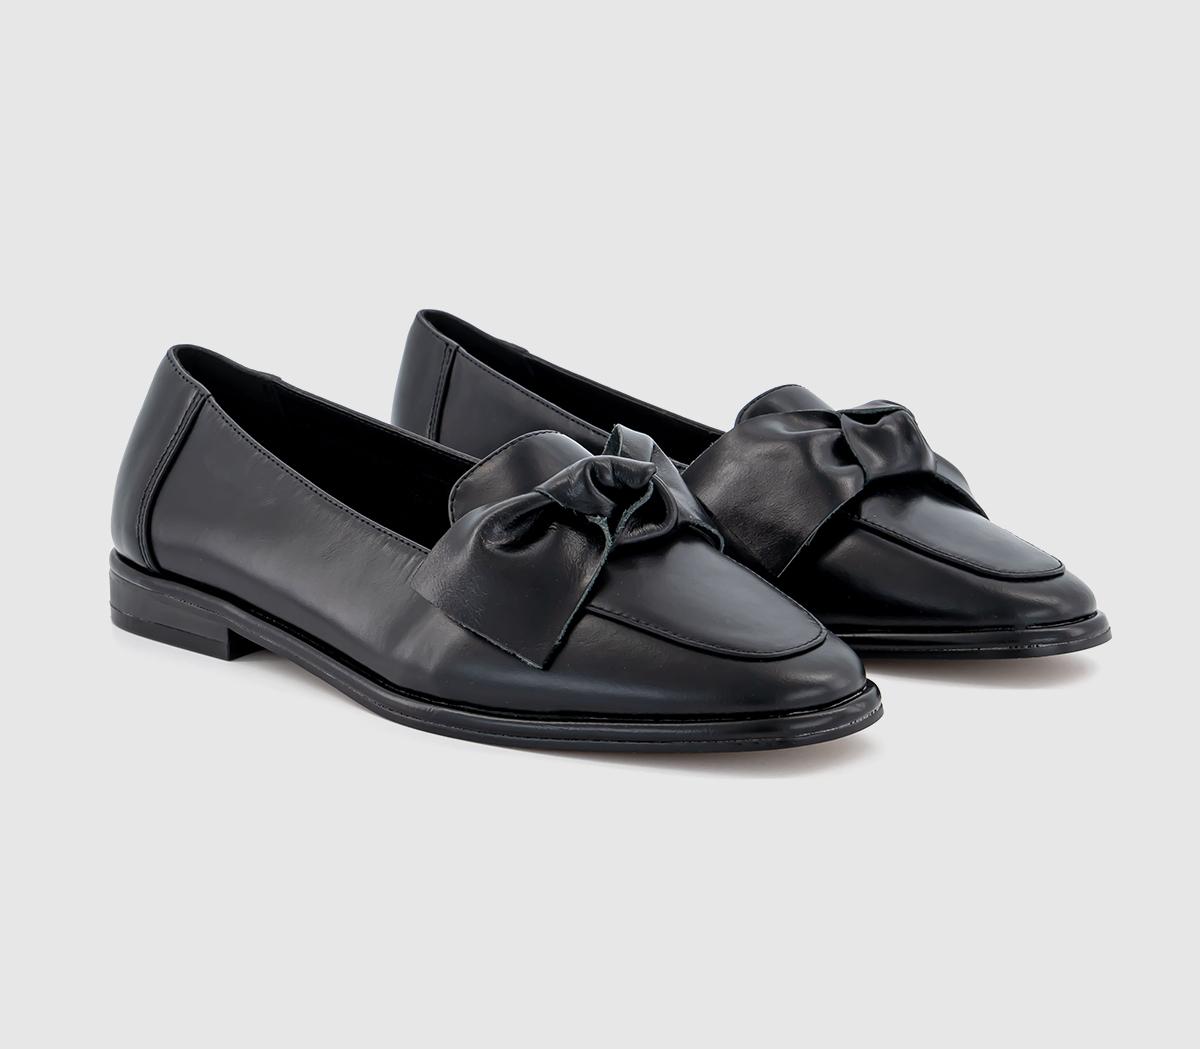 OFFICE Womens Fallon Bow Leather Loafer Black, 5